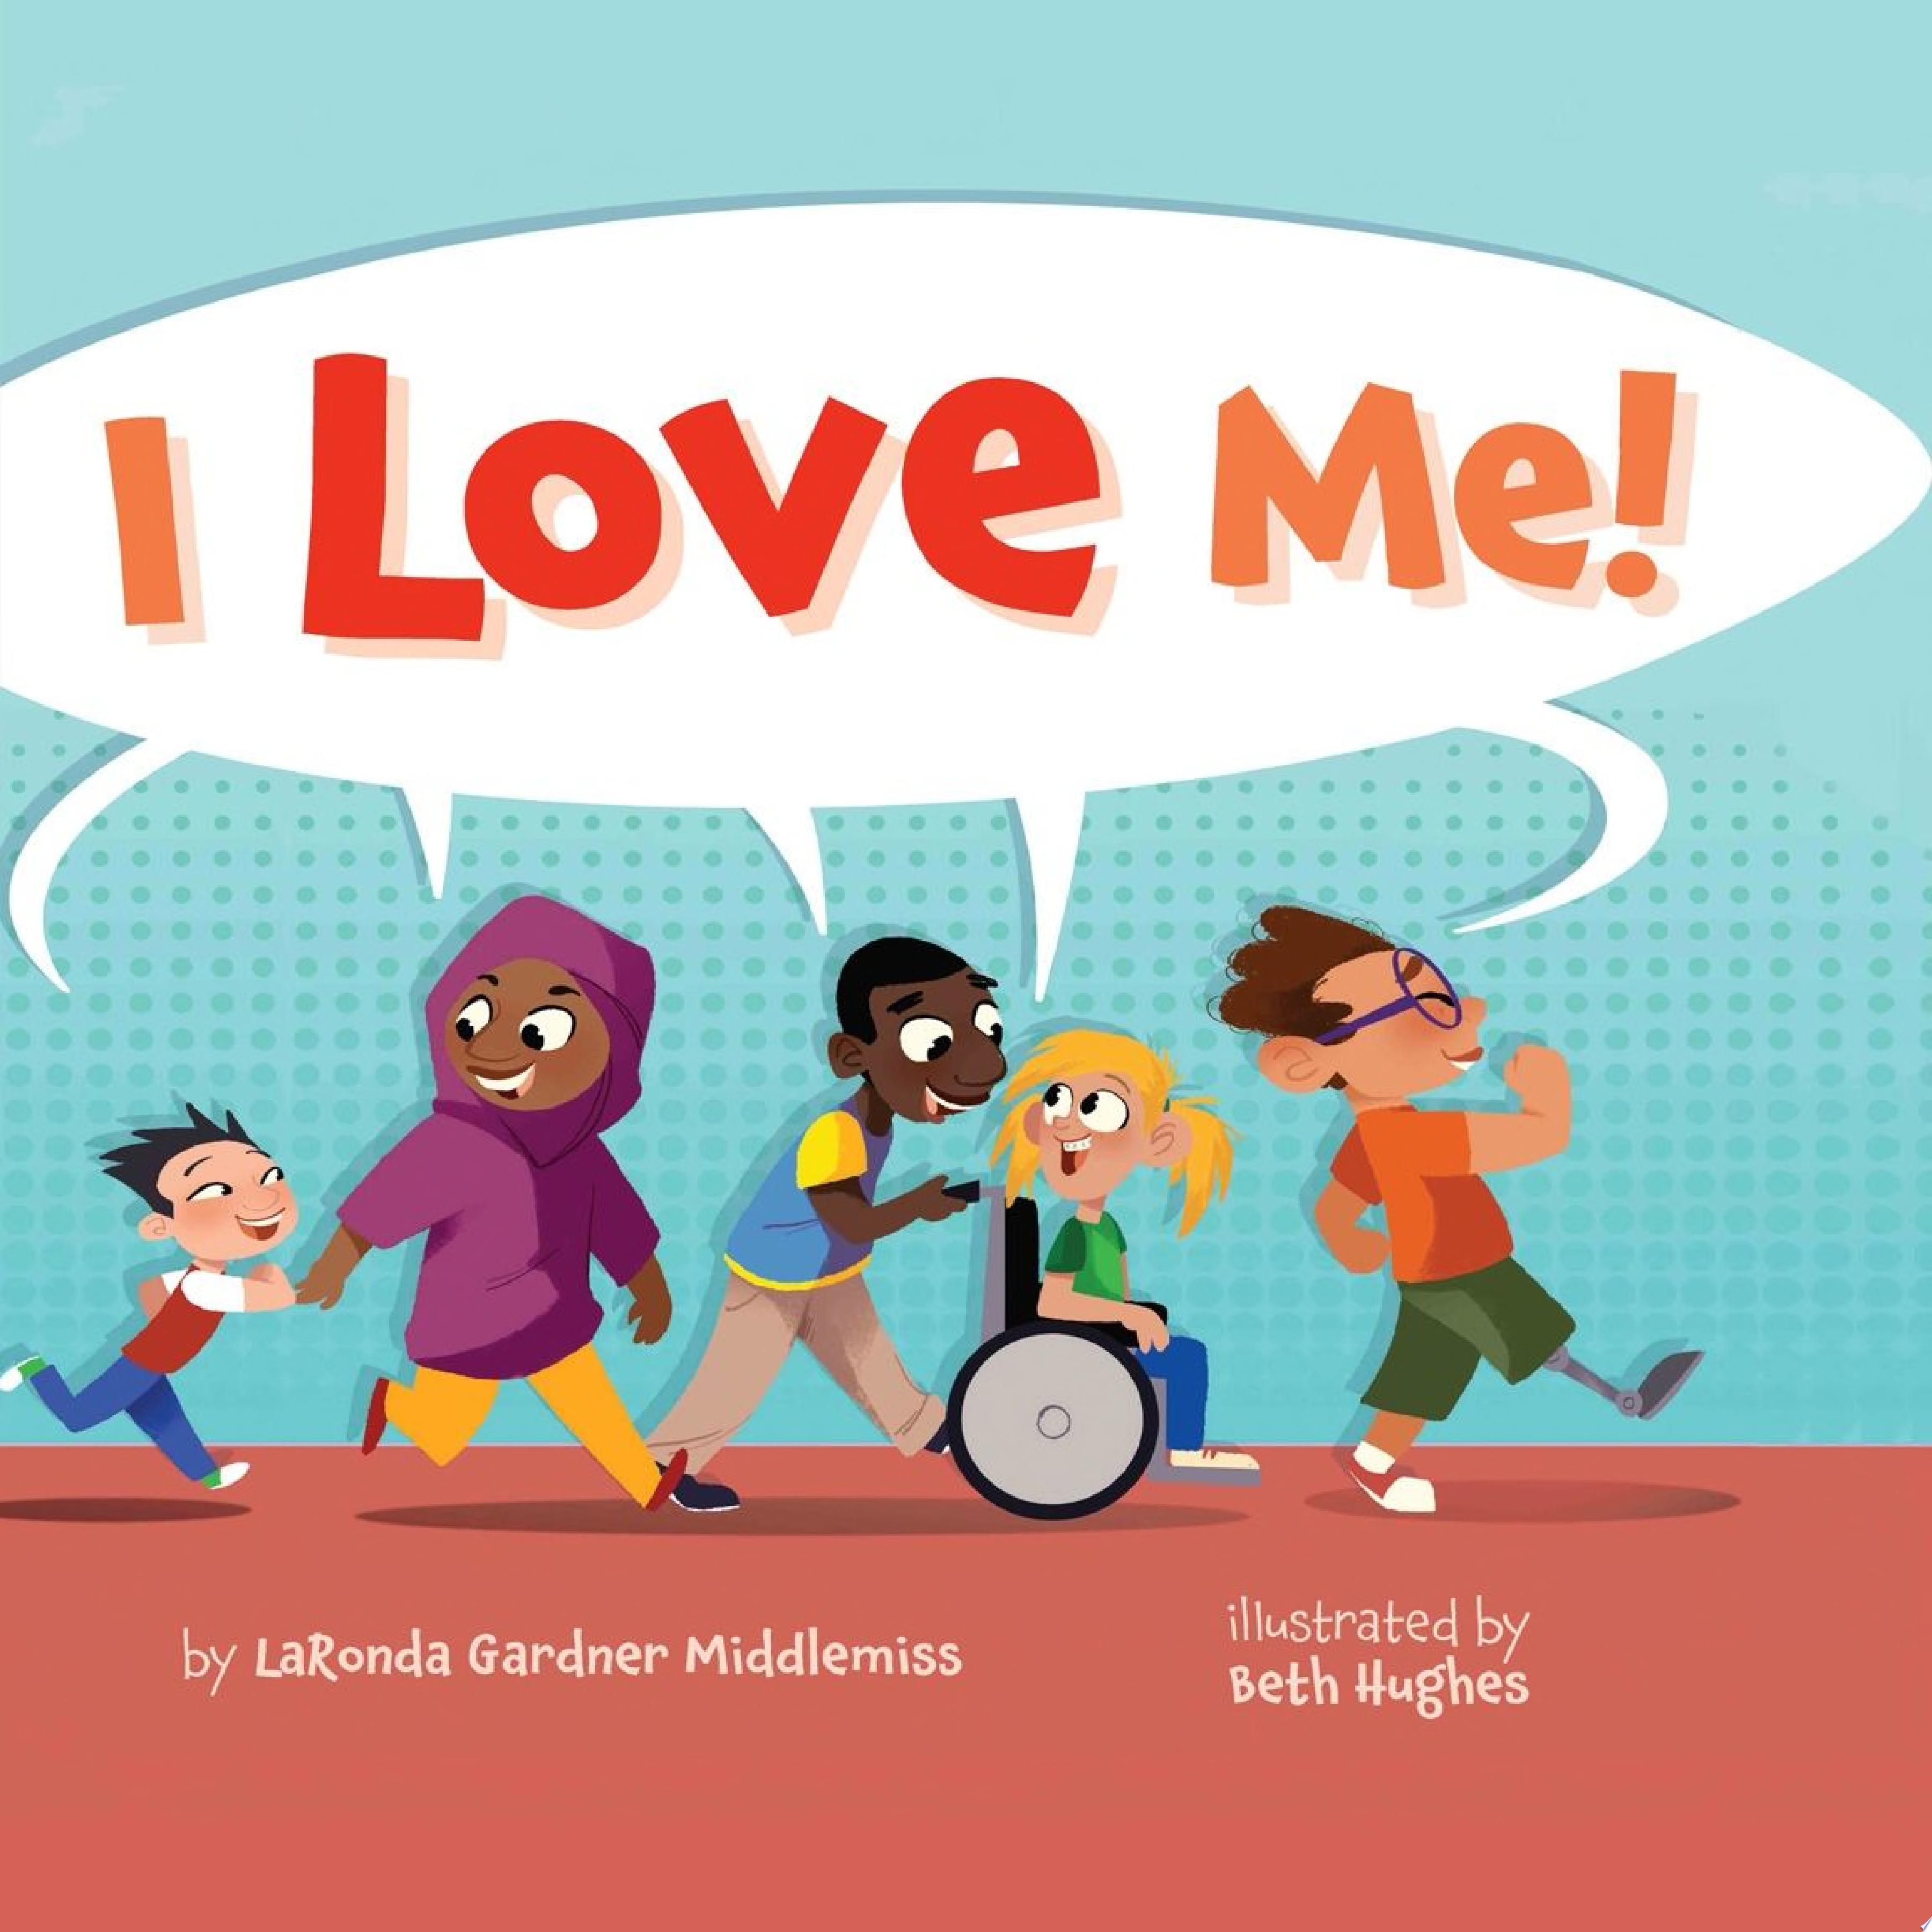 Image for "I Love Me!"